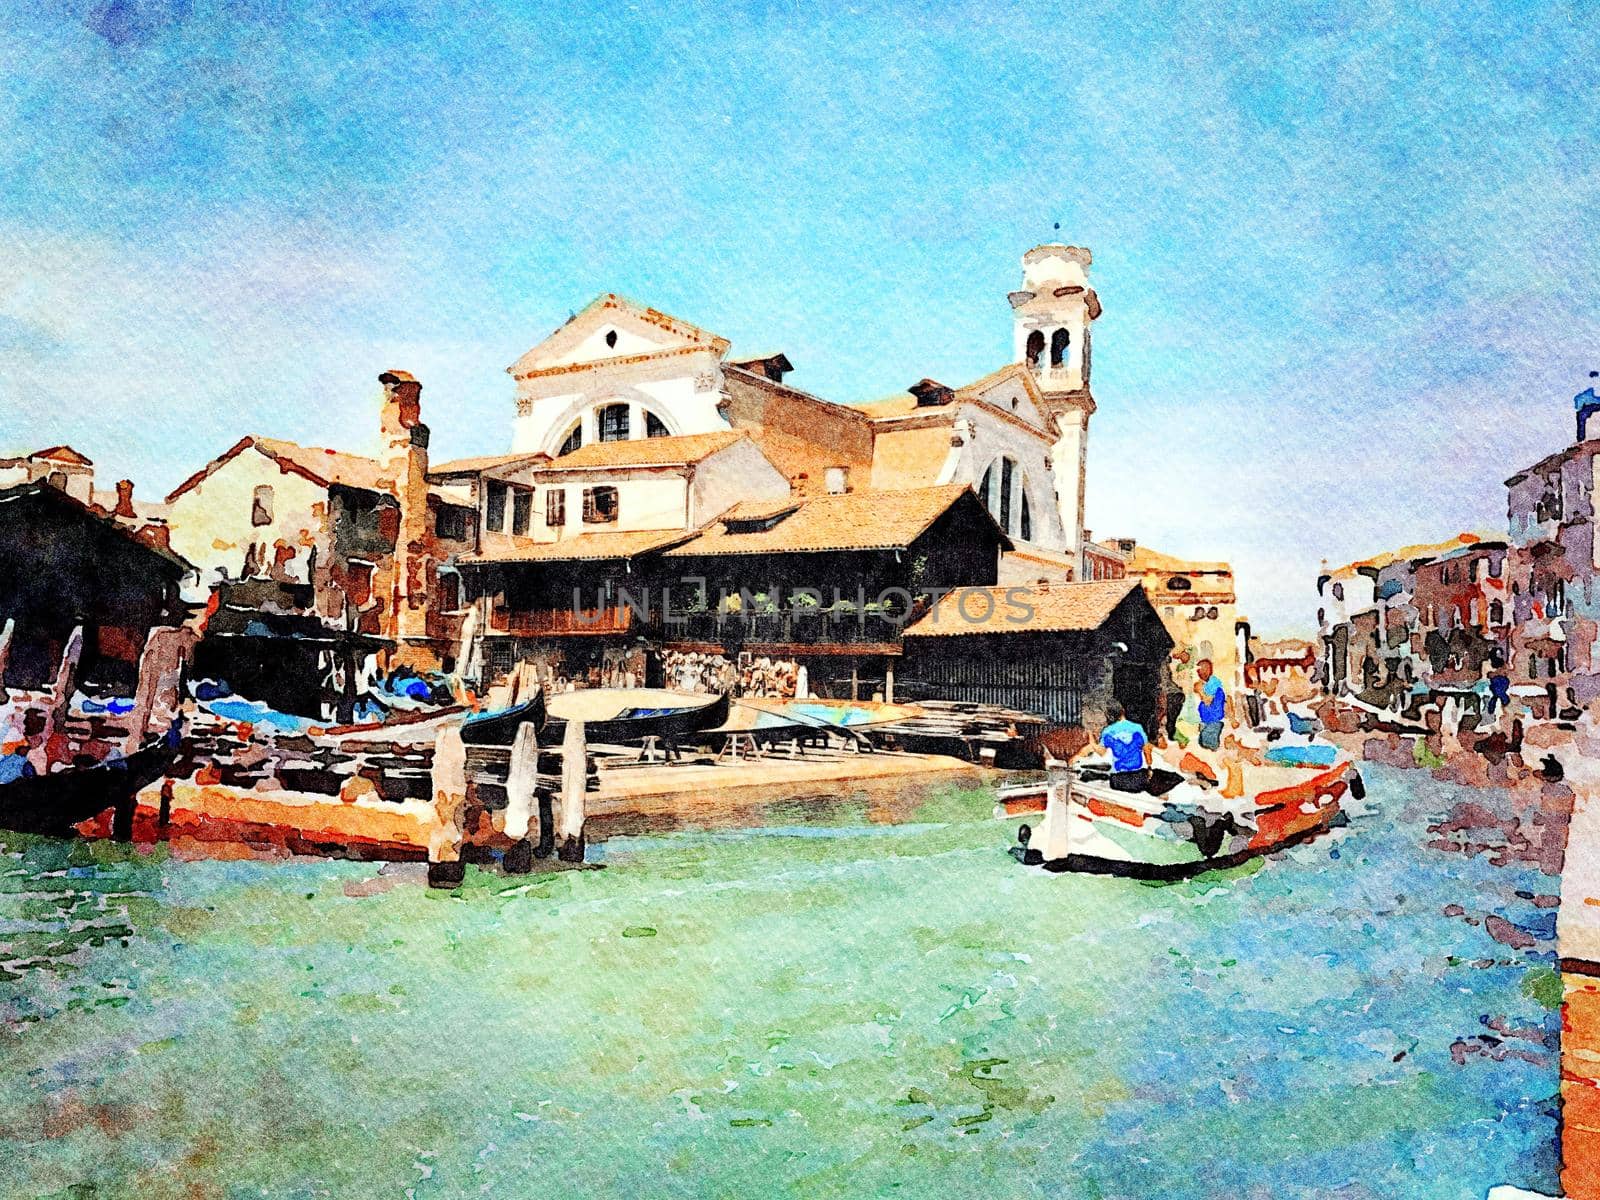 Watercolor which represents a glimpse of one of the canals between the buildings of the historic center of Venice